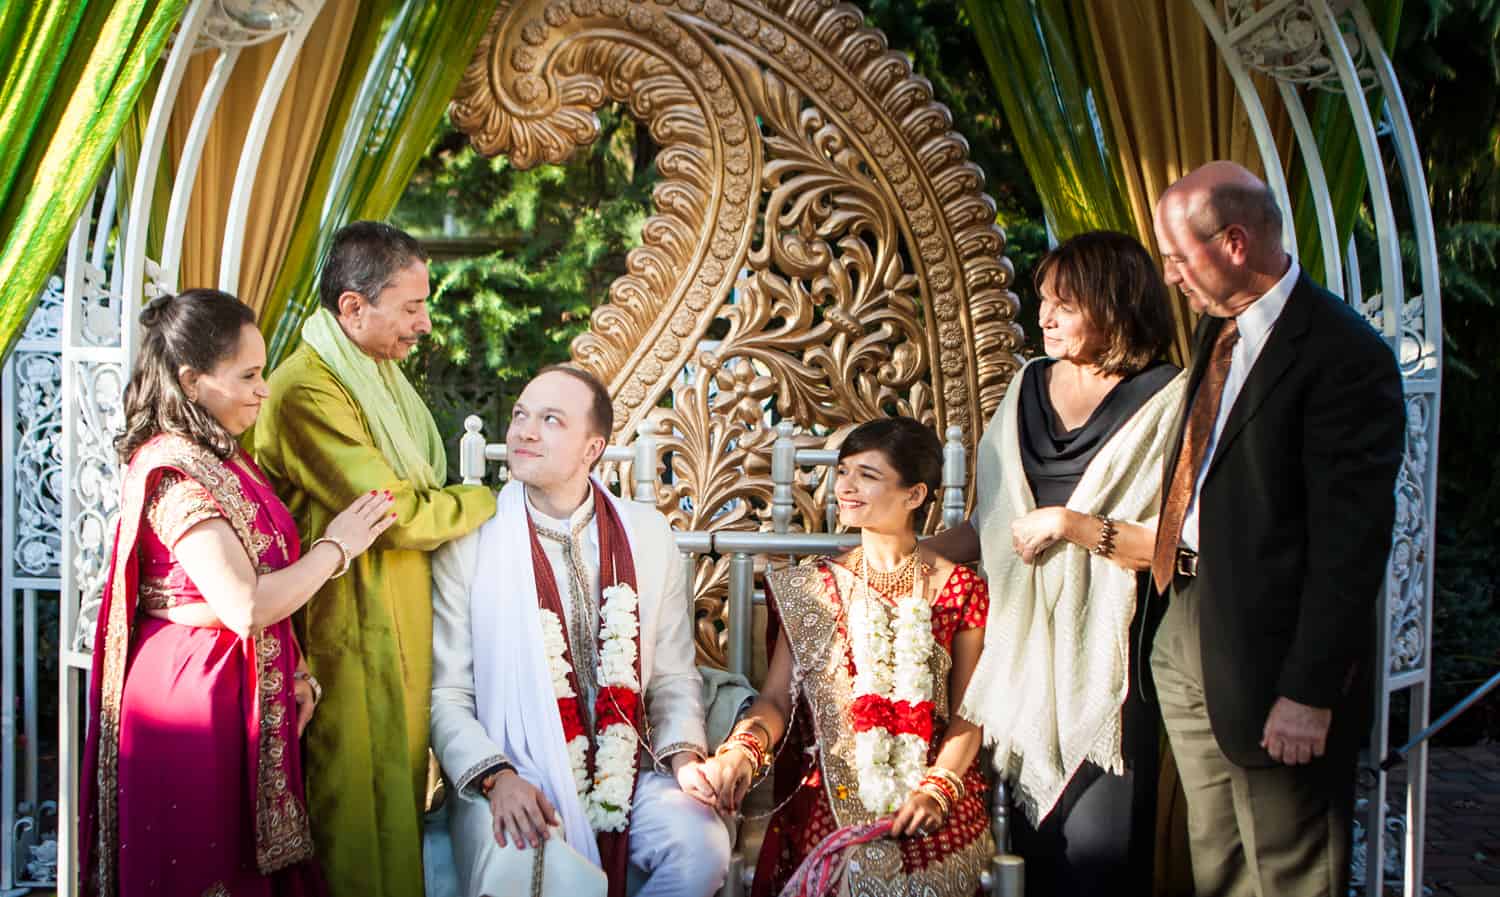 Parents speaking to bride and groom during traditional Hindu wedding ceremony